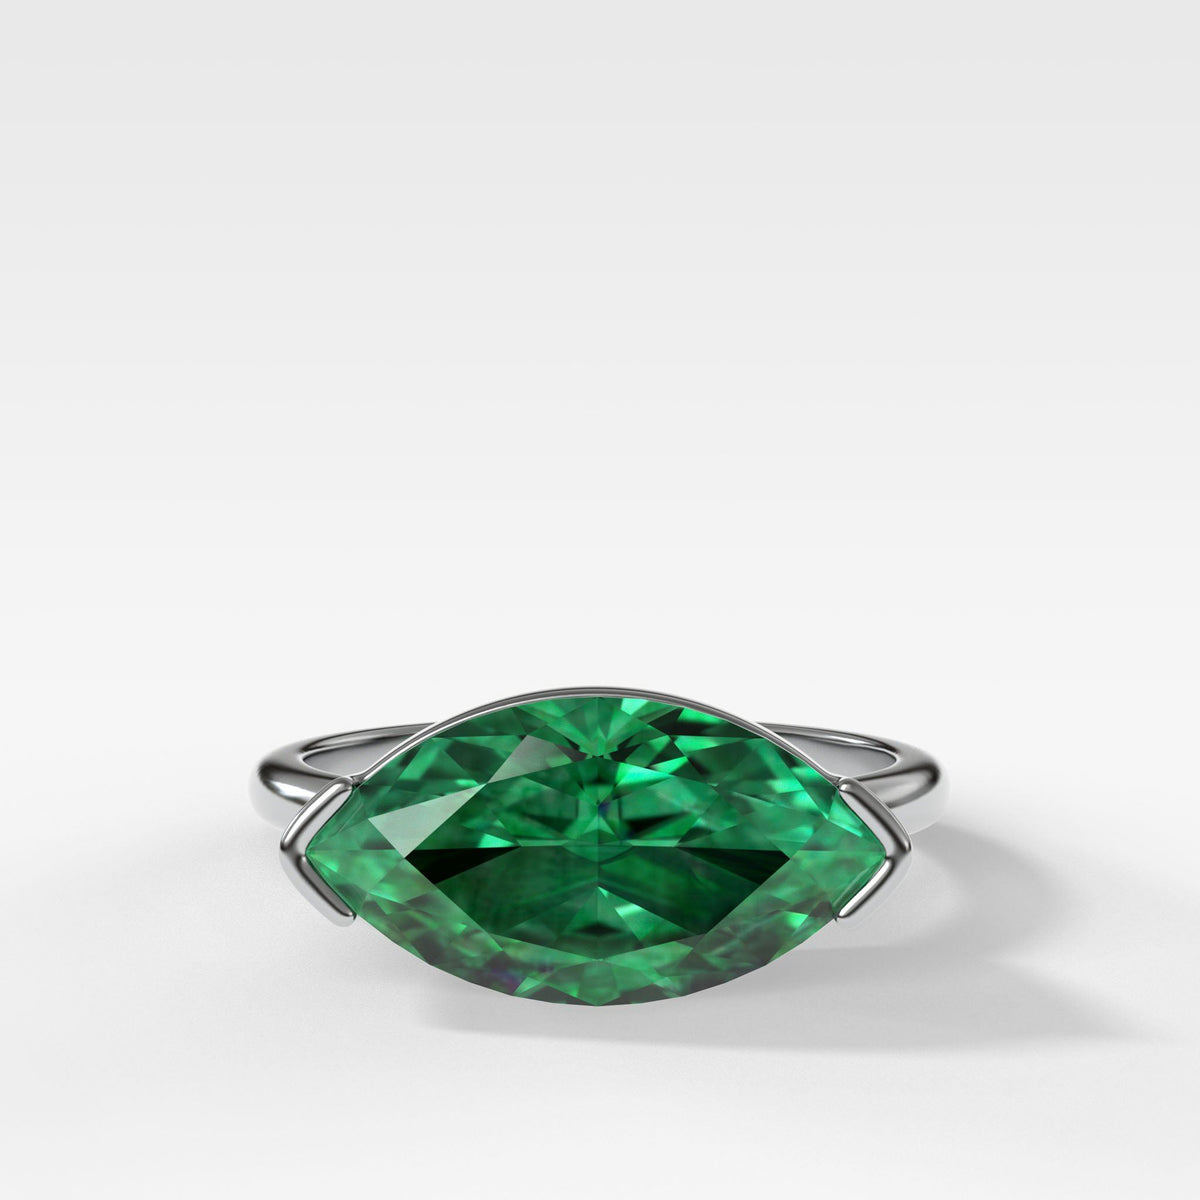 East West Half Bezel Solitaire Engagement Ring With Green Emerald Marquise Cut by Good Stone in White Gold